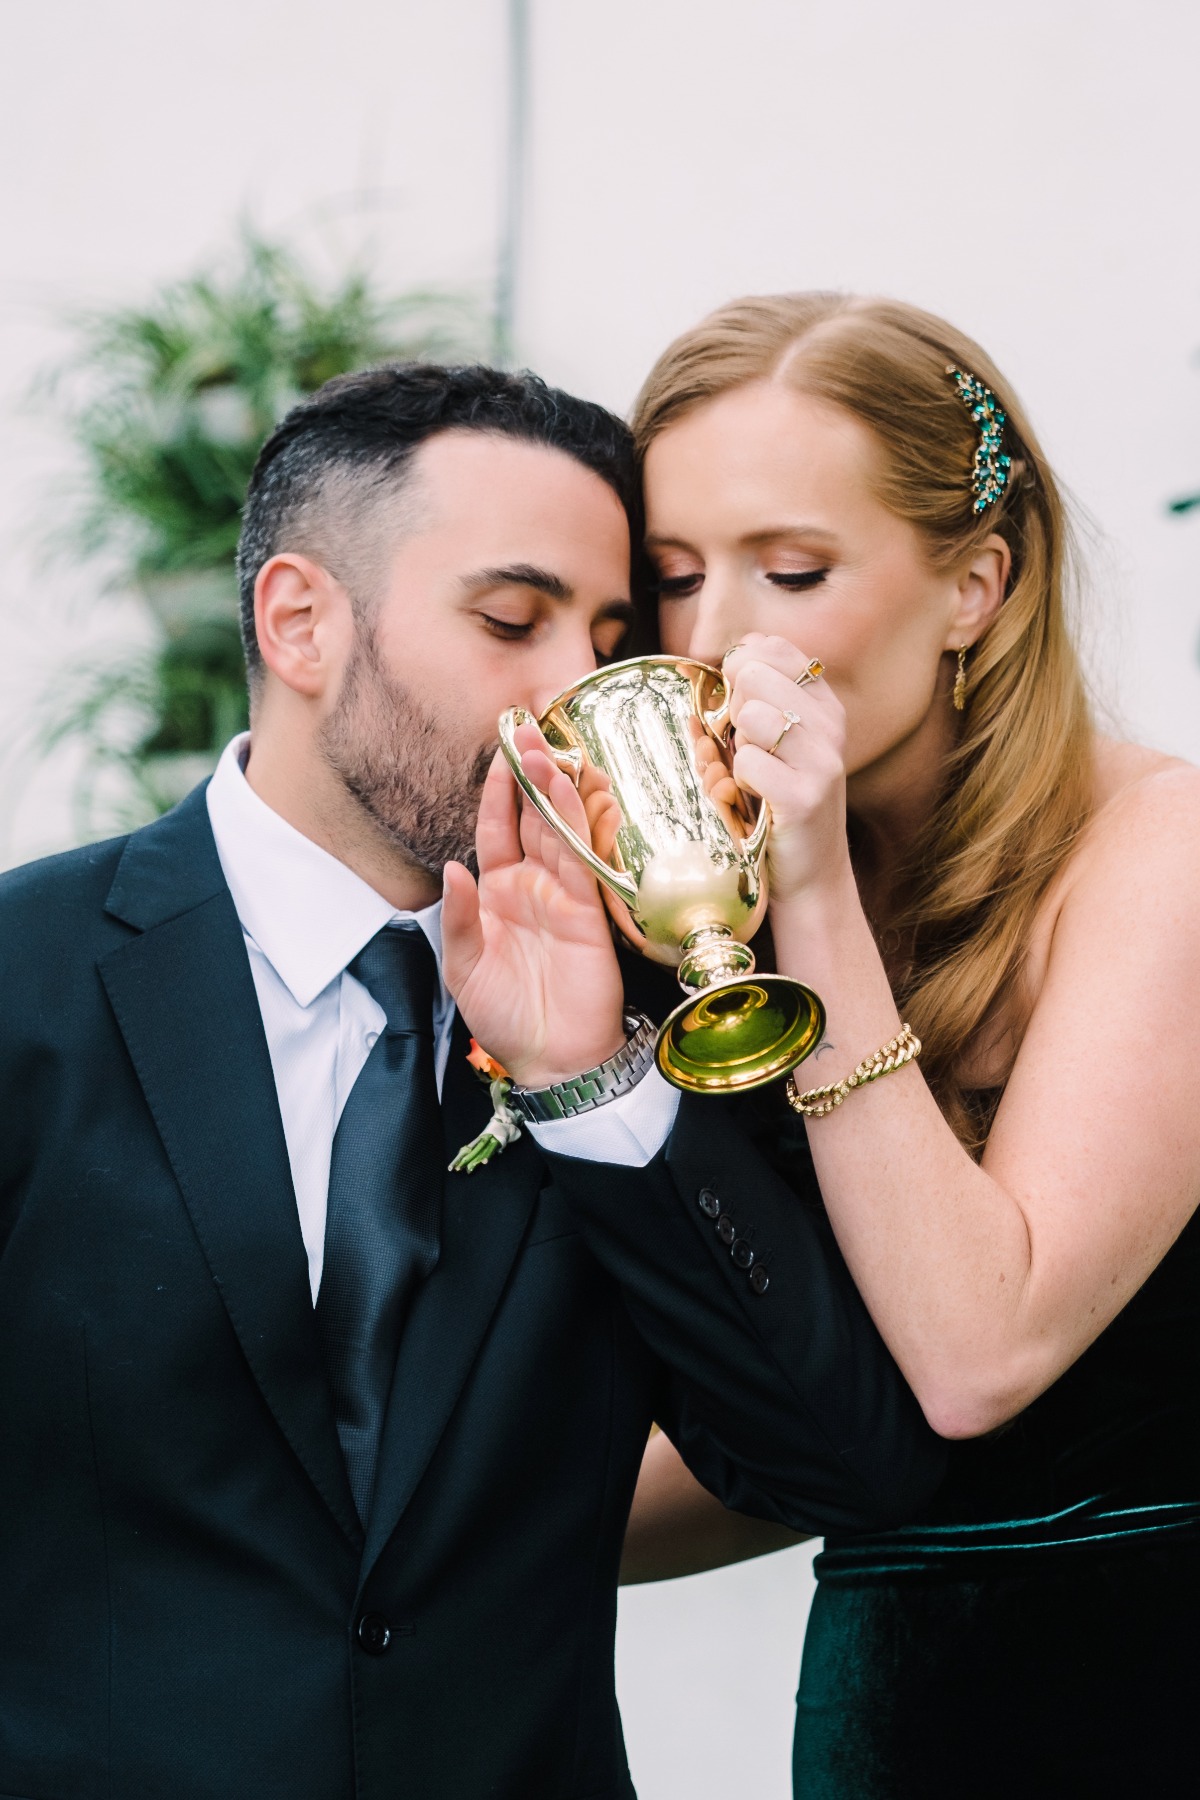 Couple drinking out of wedding goblet